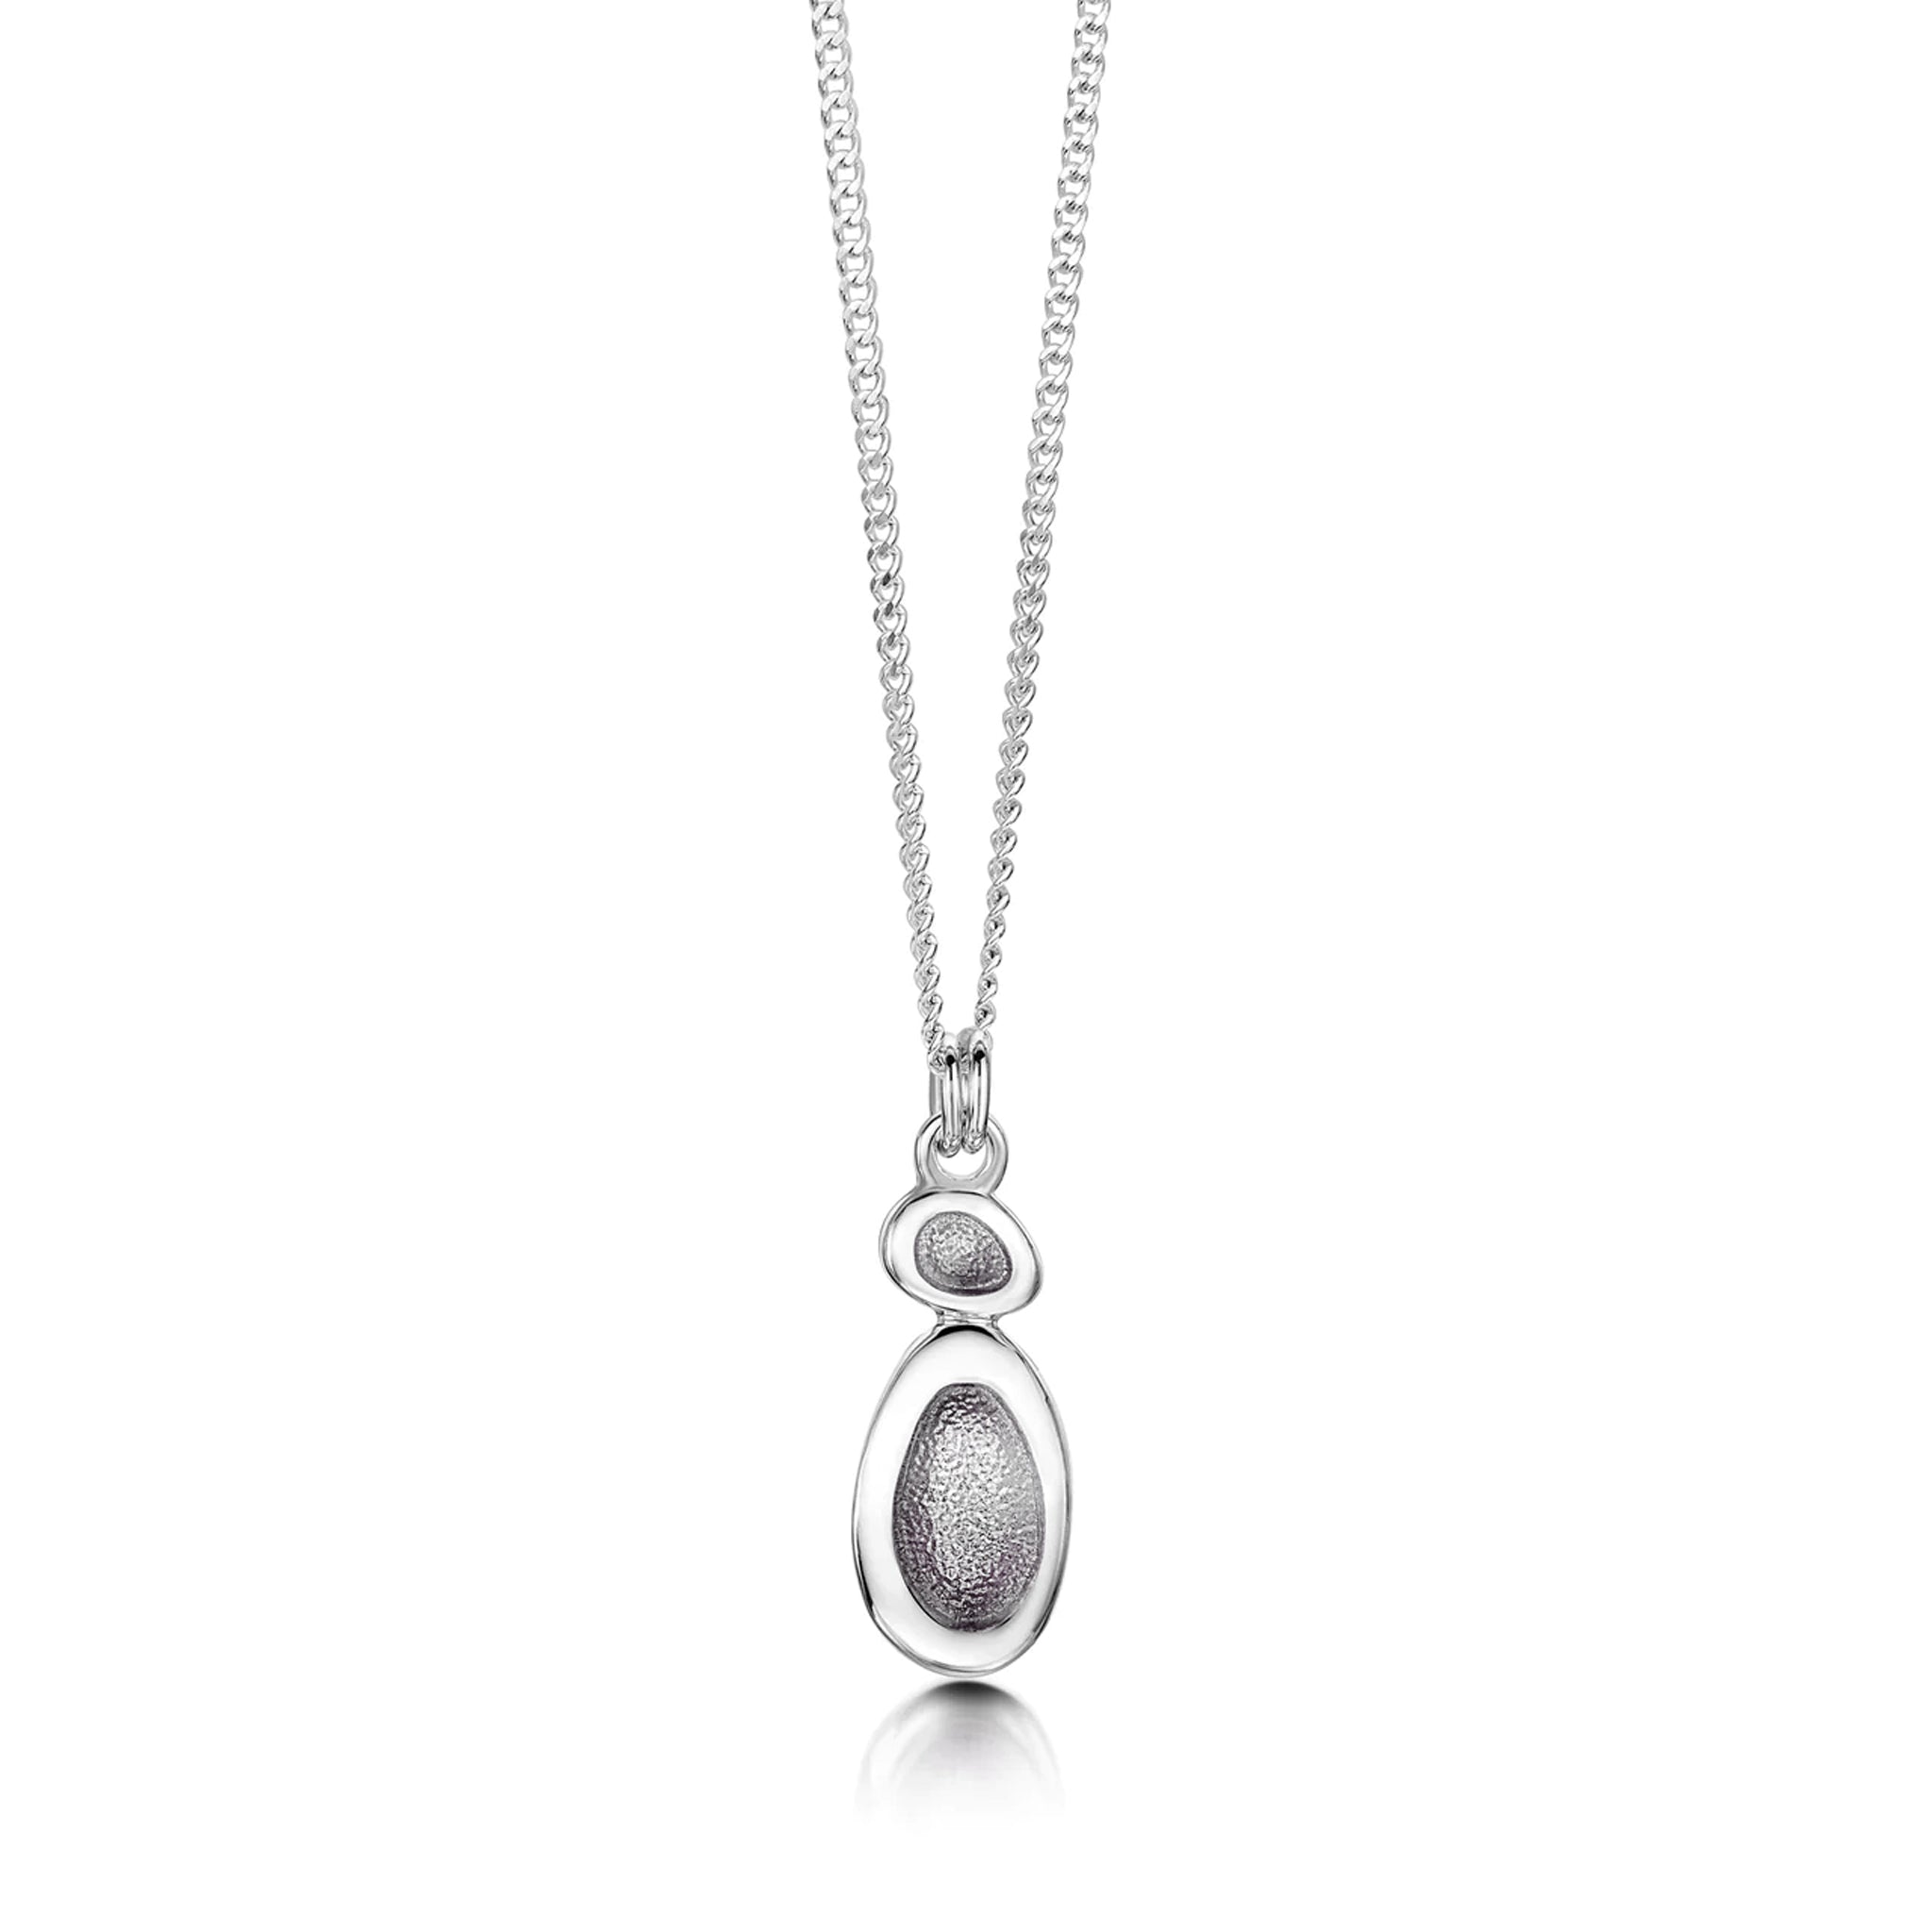 Silver tiny pendant in organic stacked pebble shape with pearl grey enamel and silver chain